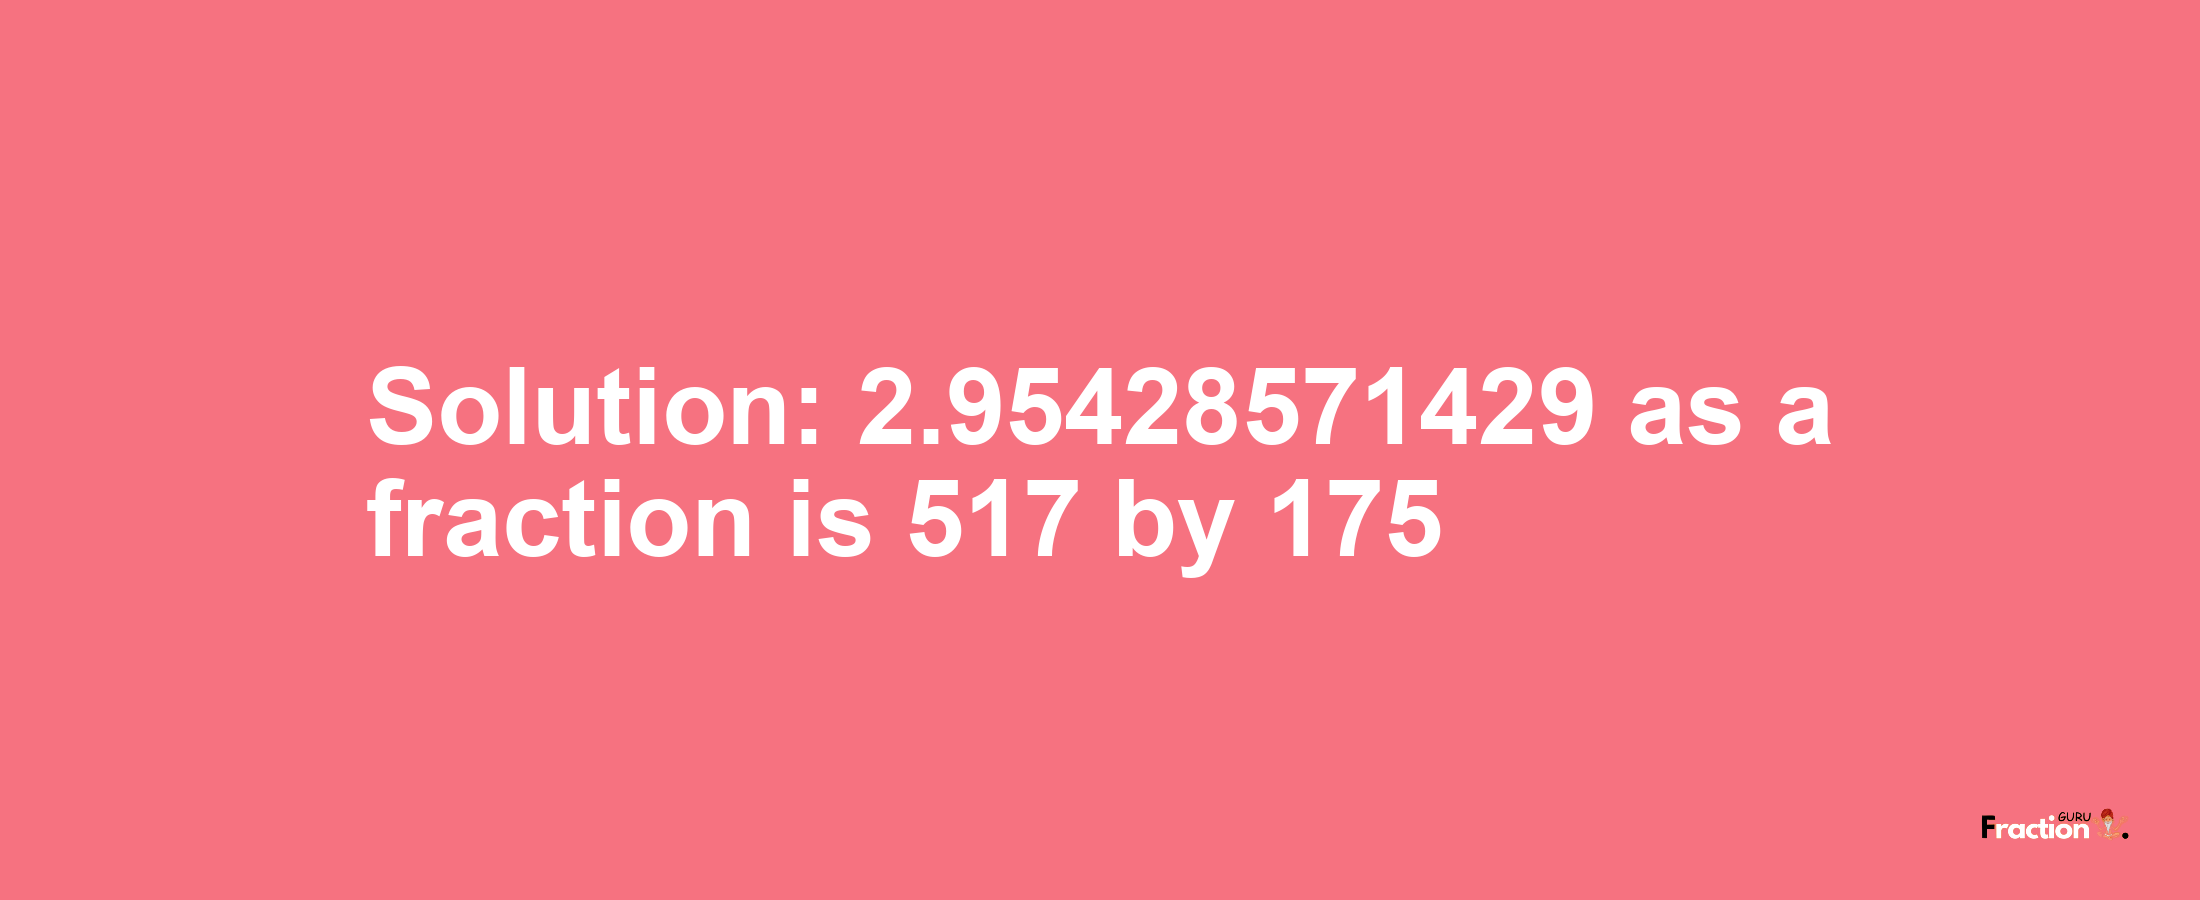 Solution:2.95428571429 as a fraction is 517/175